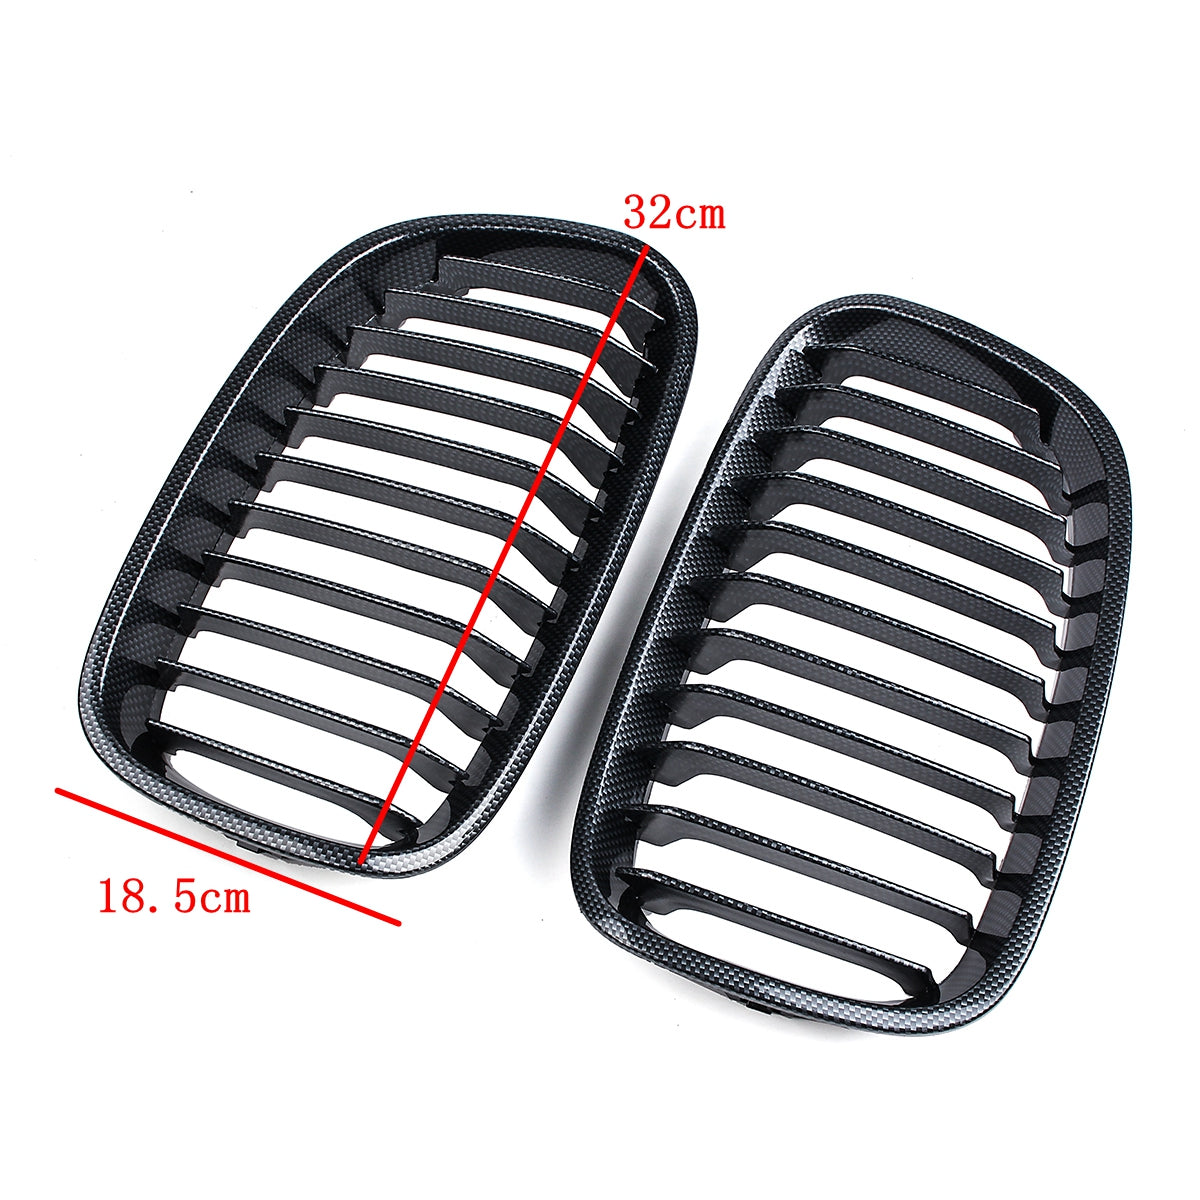 Dark Slate Gray Pair Carbon Fiber ABS Front Kidney Grille For BMW F20 F21 2011-2014